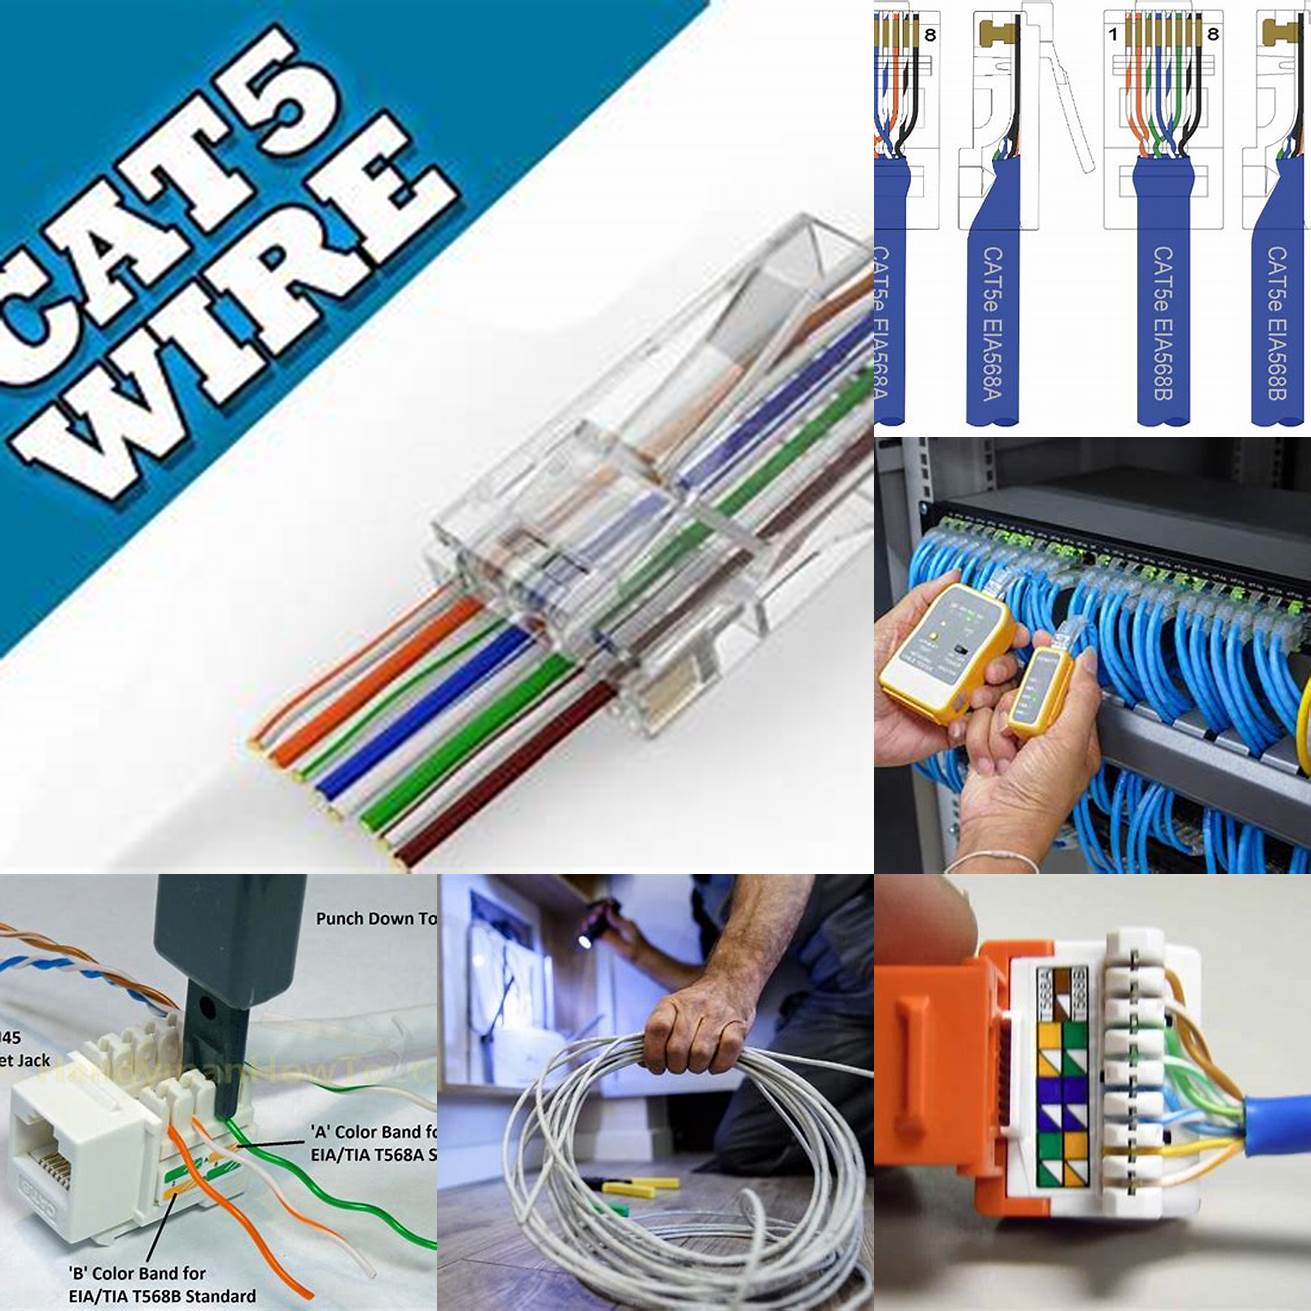 Cable installation